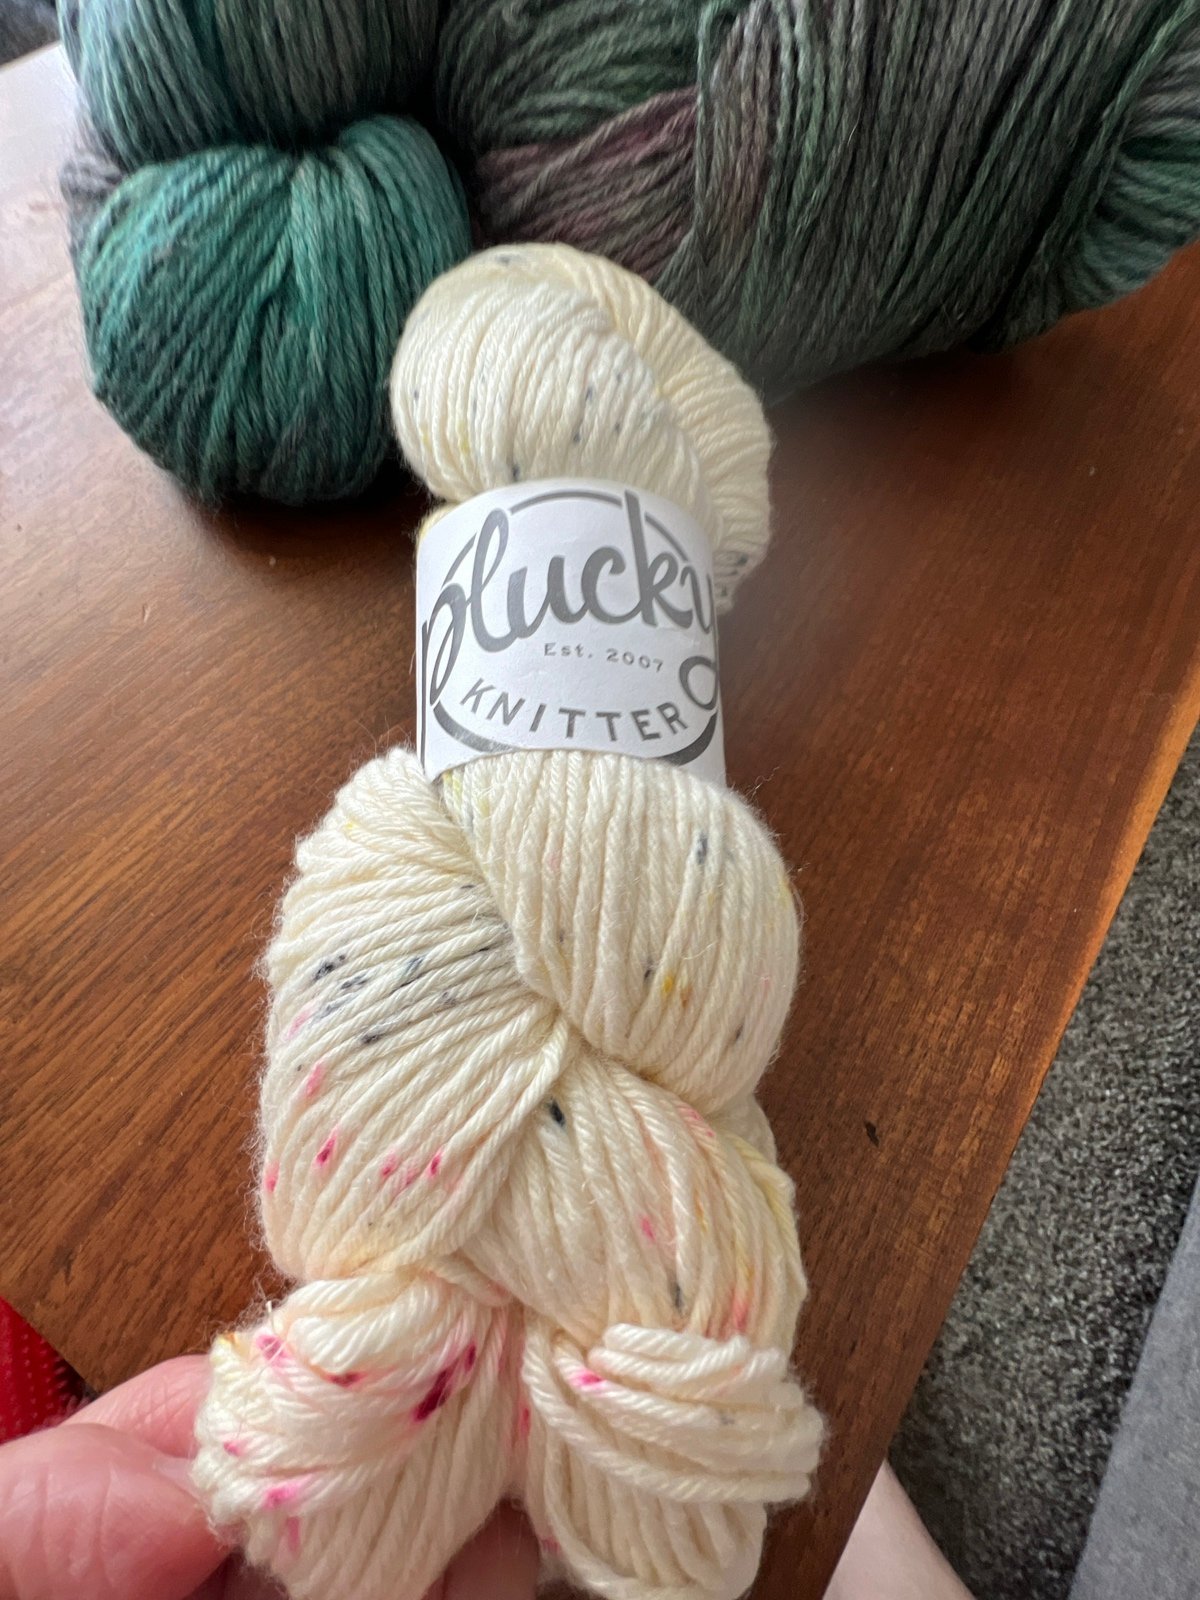 Plucky Knitter lodge worsted yarn r0de2N1QQ